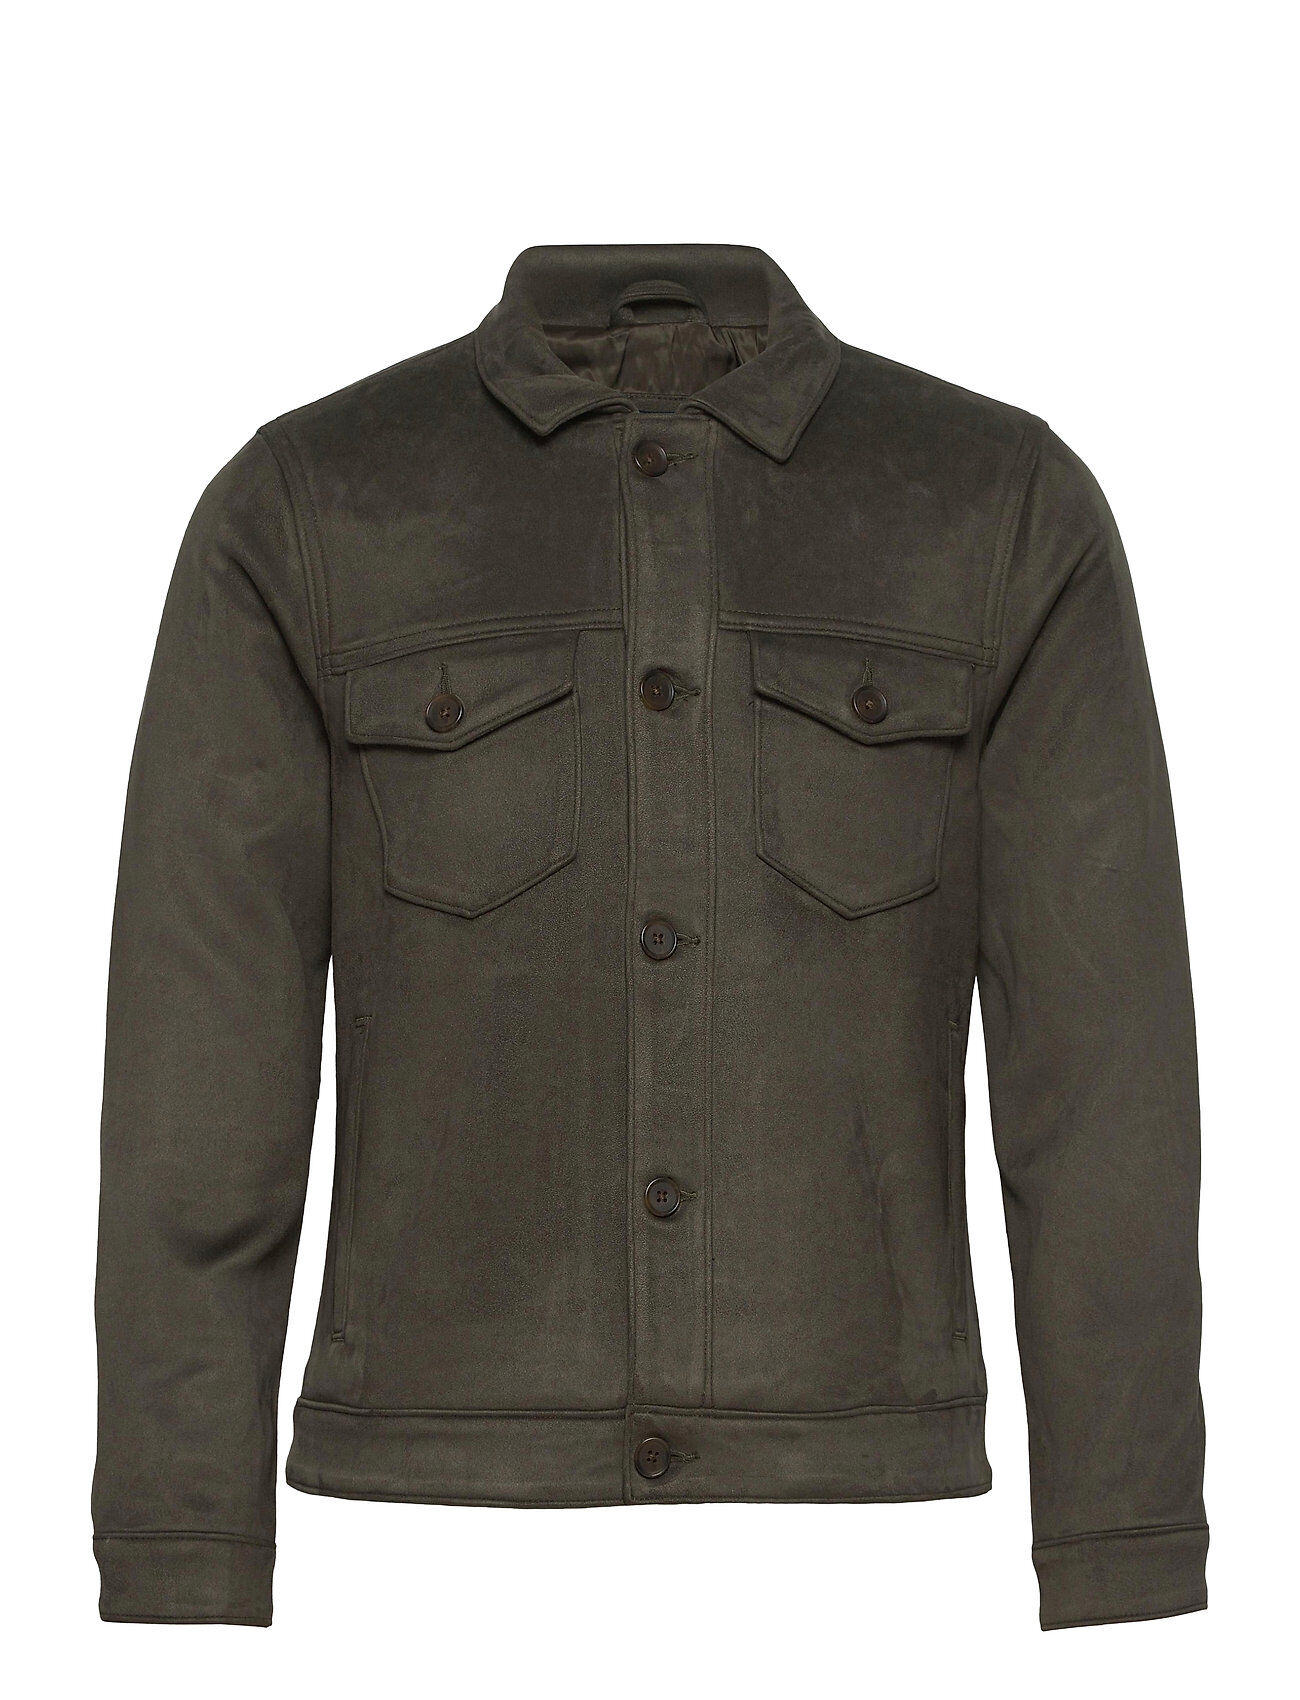 Abercrombie & Fitch Anf Mens Outerwear Dongerijakke Denimjakke Grønn Abercrombie & Fitch